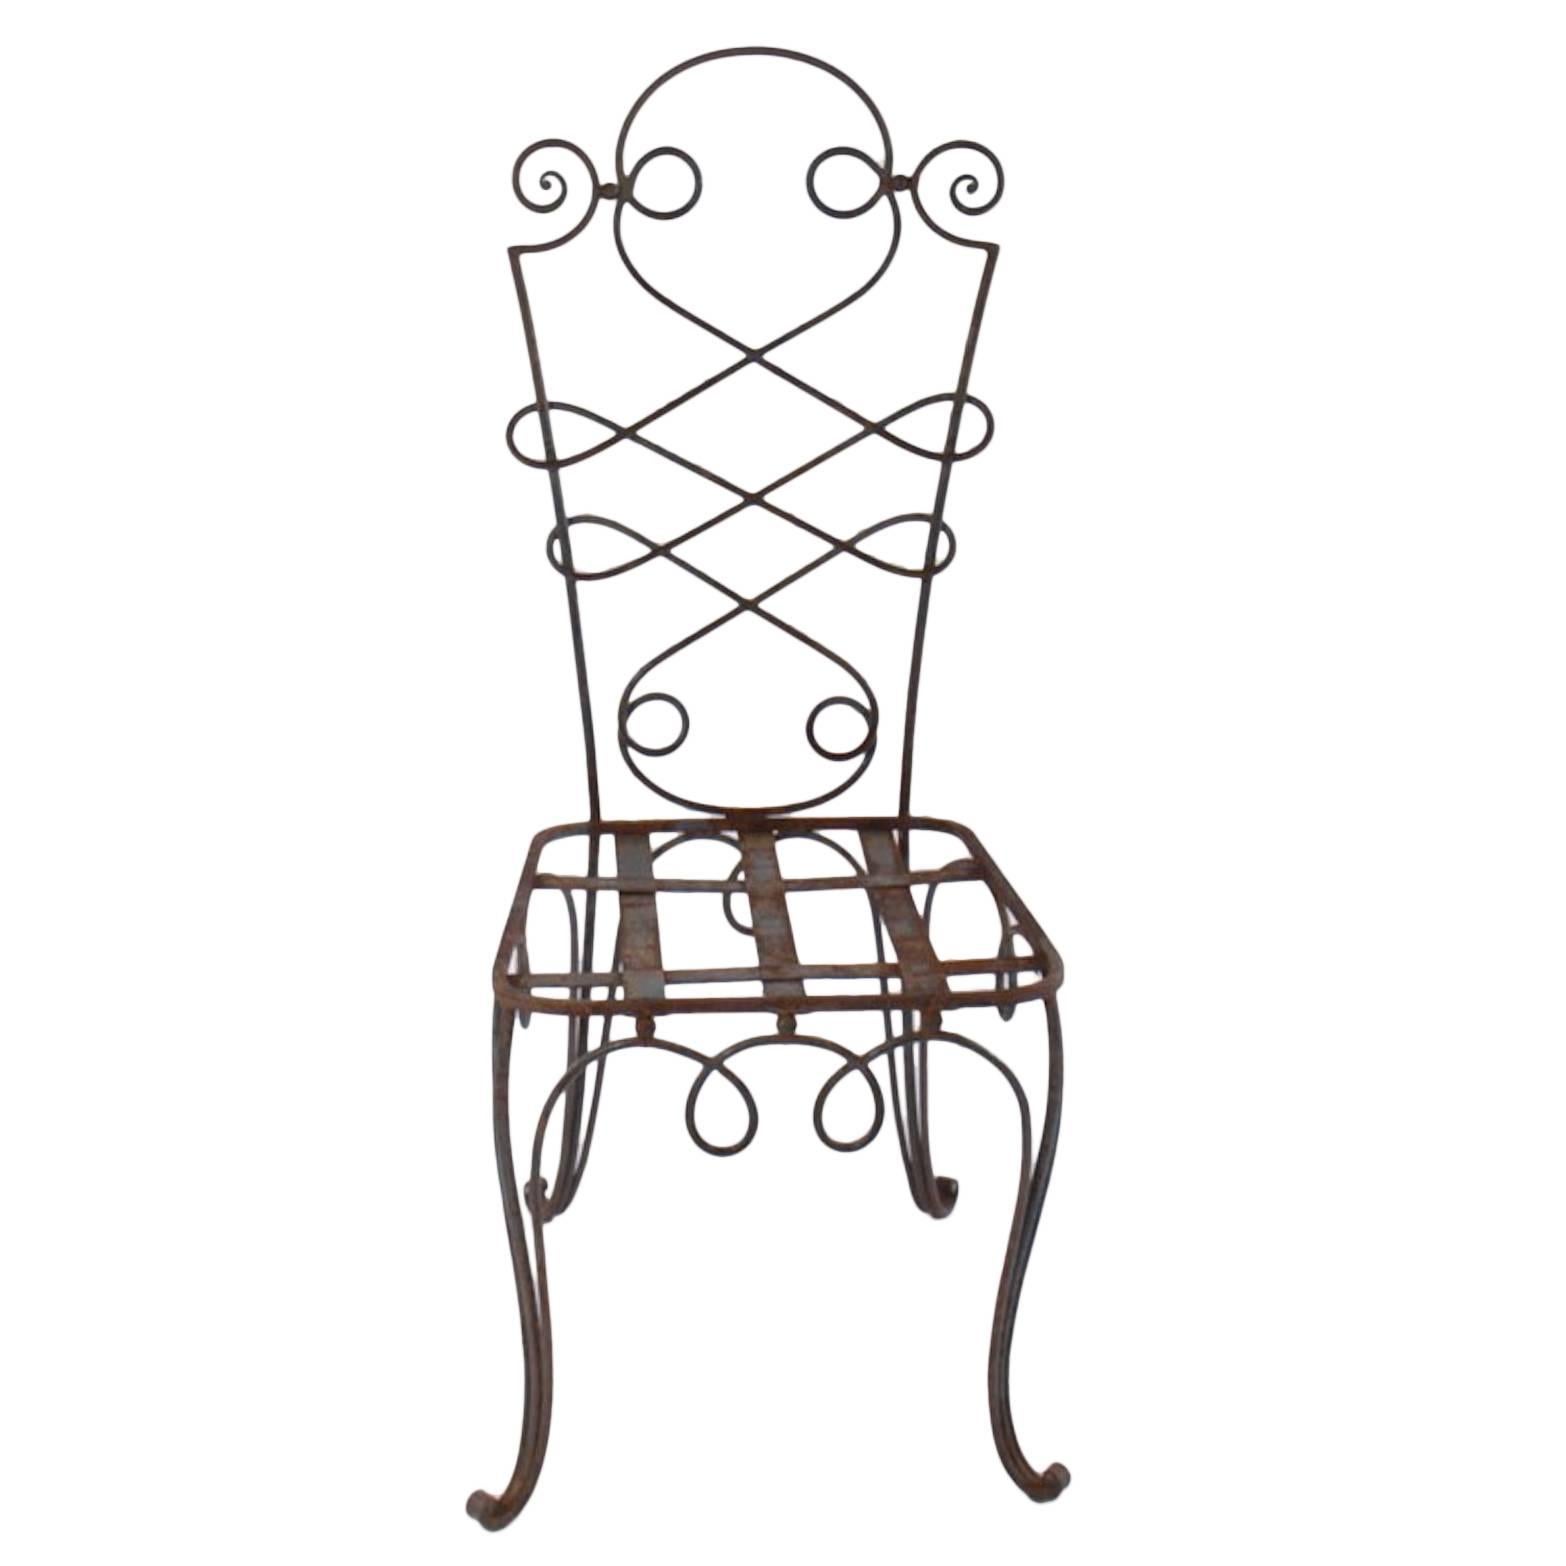 René Prou iron chairs, France, c. 1940. Eight (8) chairs available, sold individually. *Chairs require seat cushions.